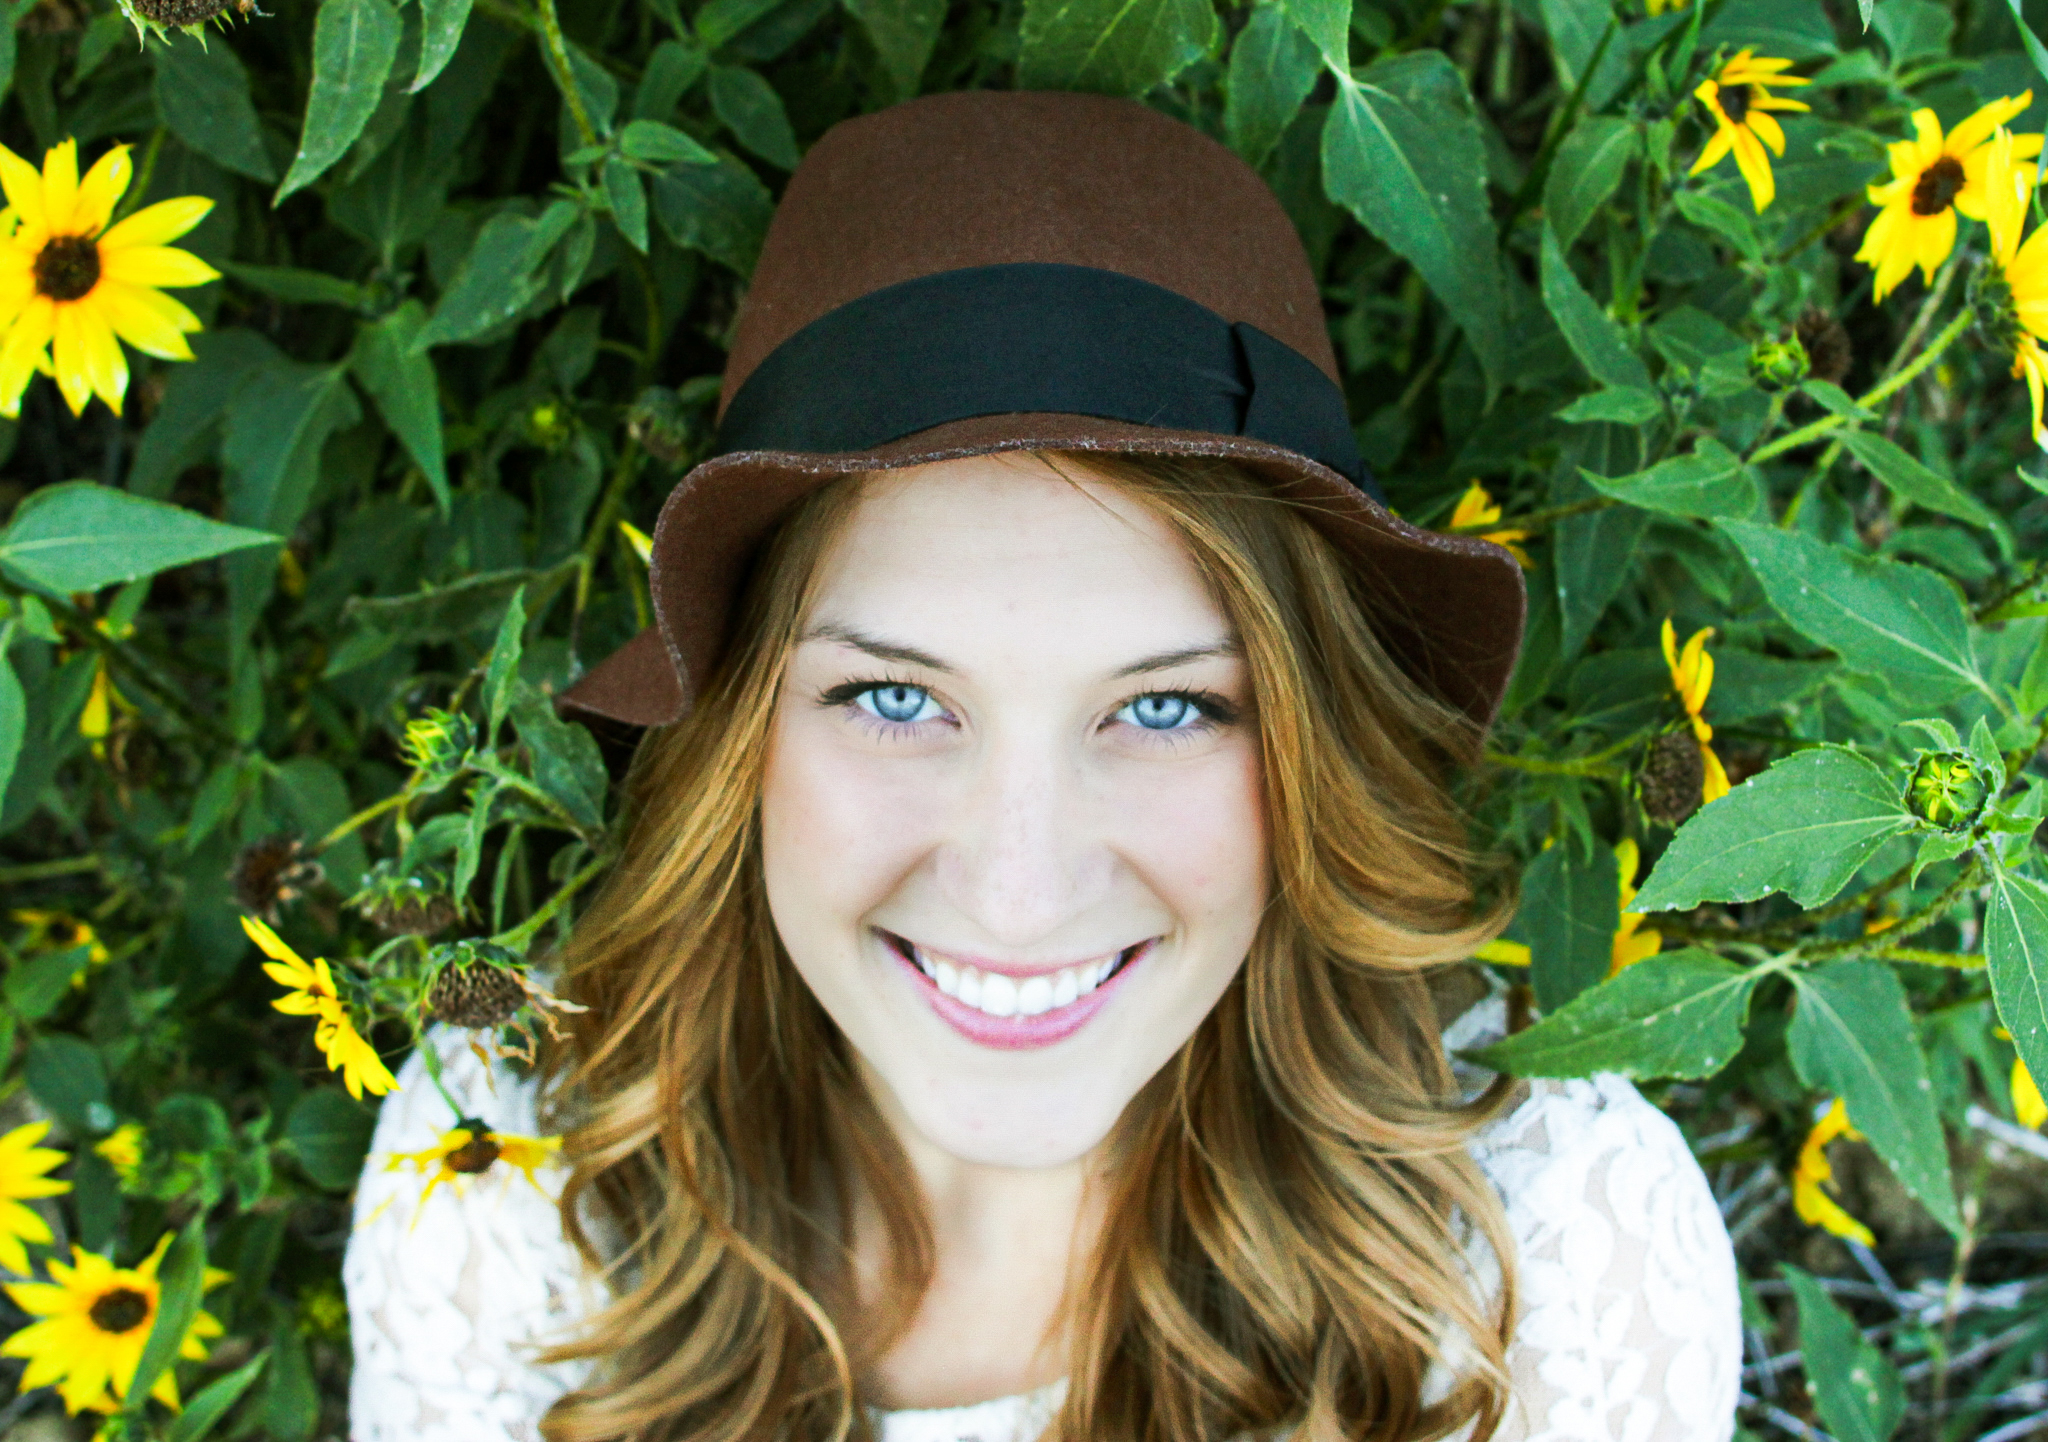 College senior photo of girl with hat smiling in front of flowers